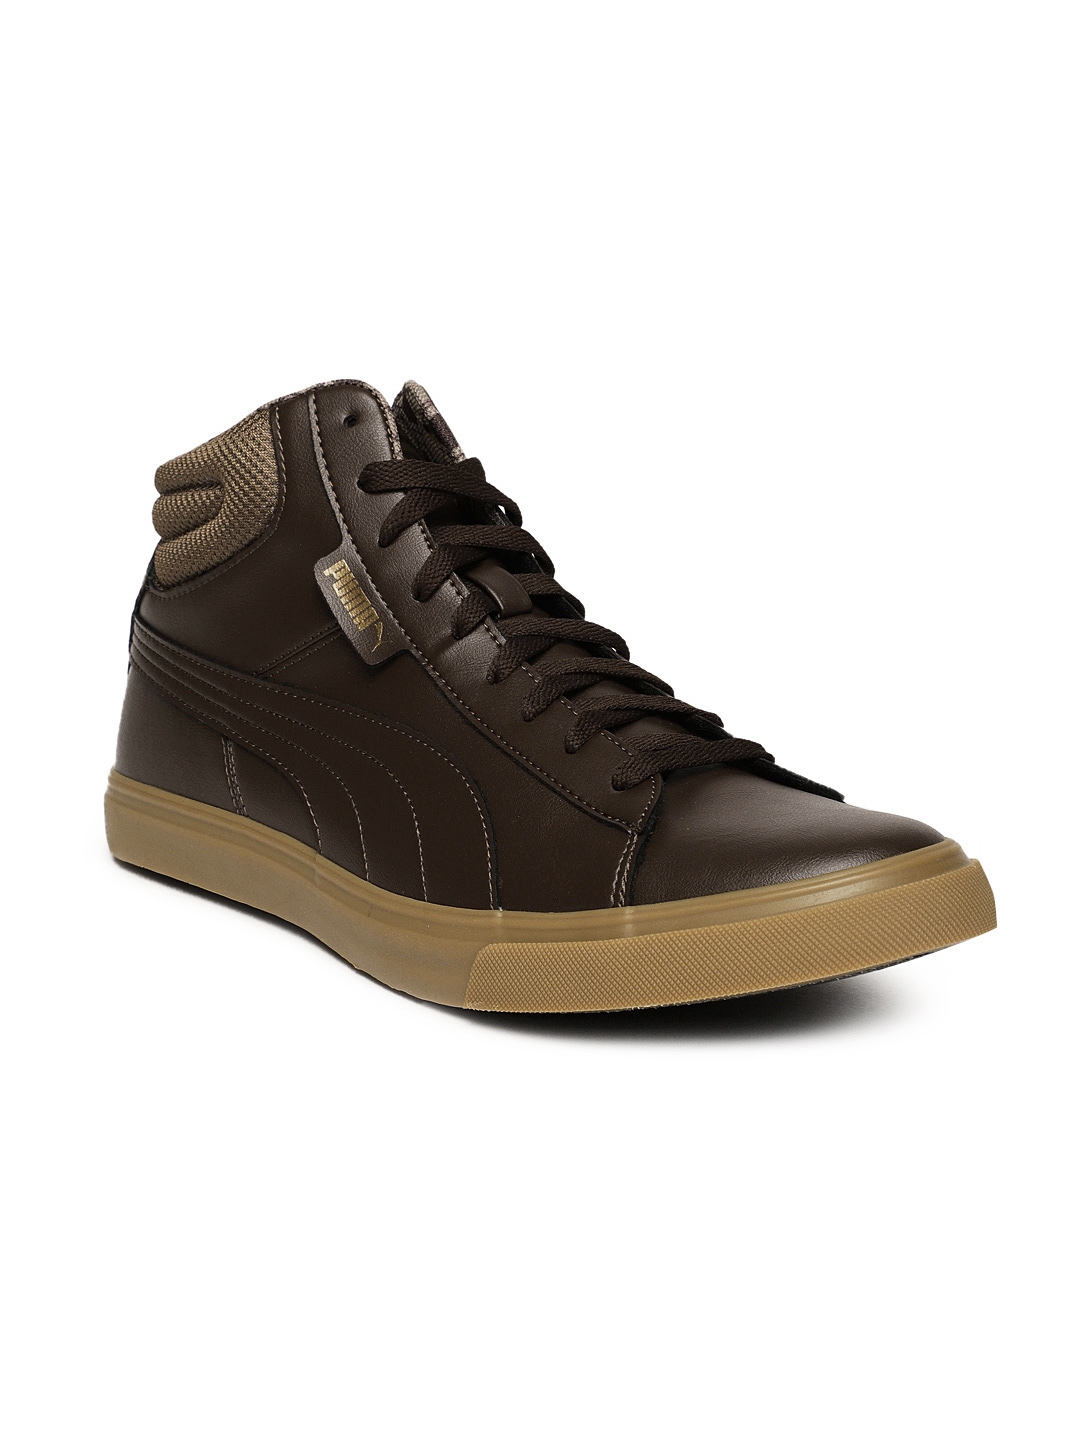 puma brown leather shoes